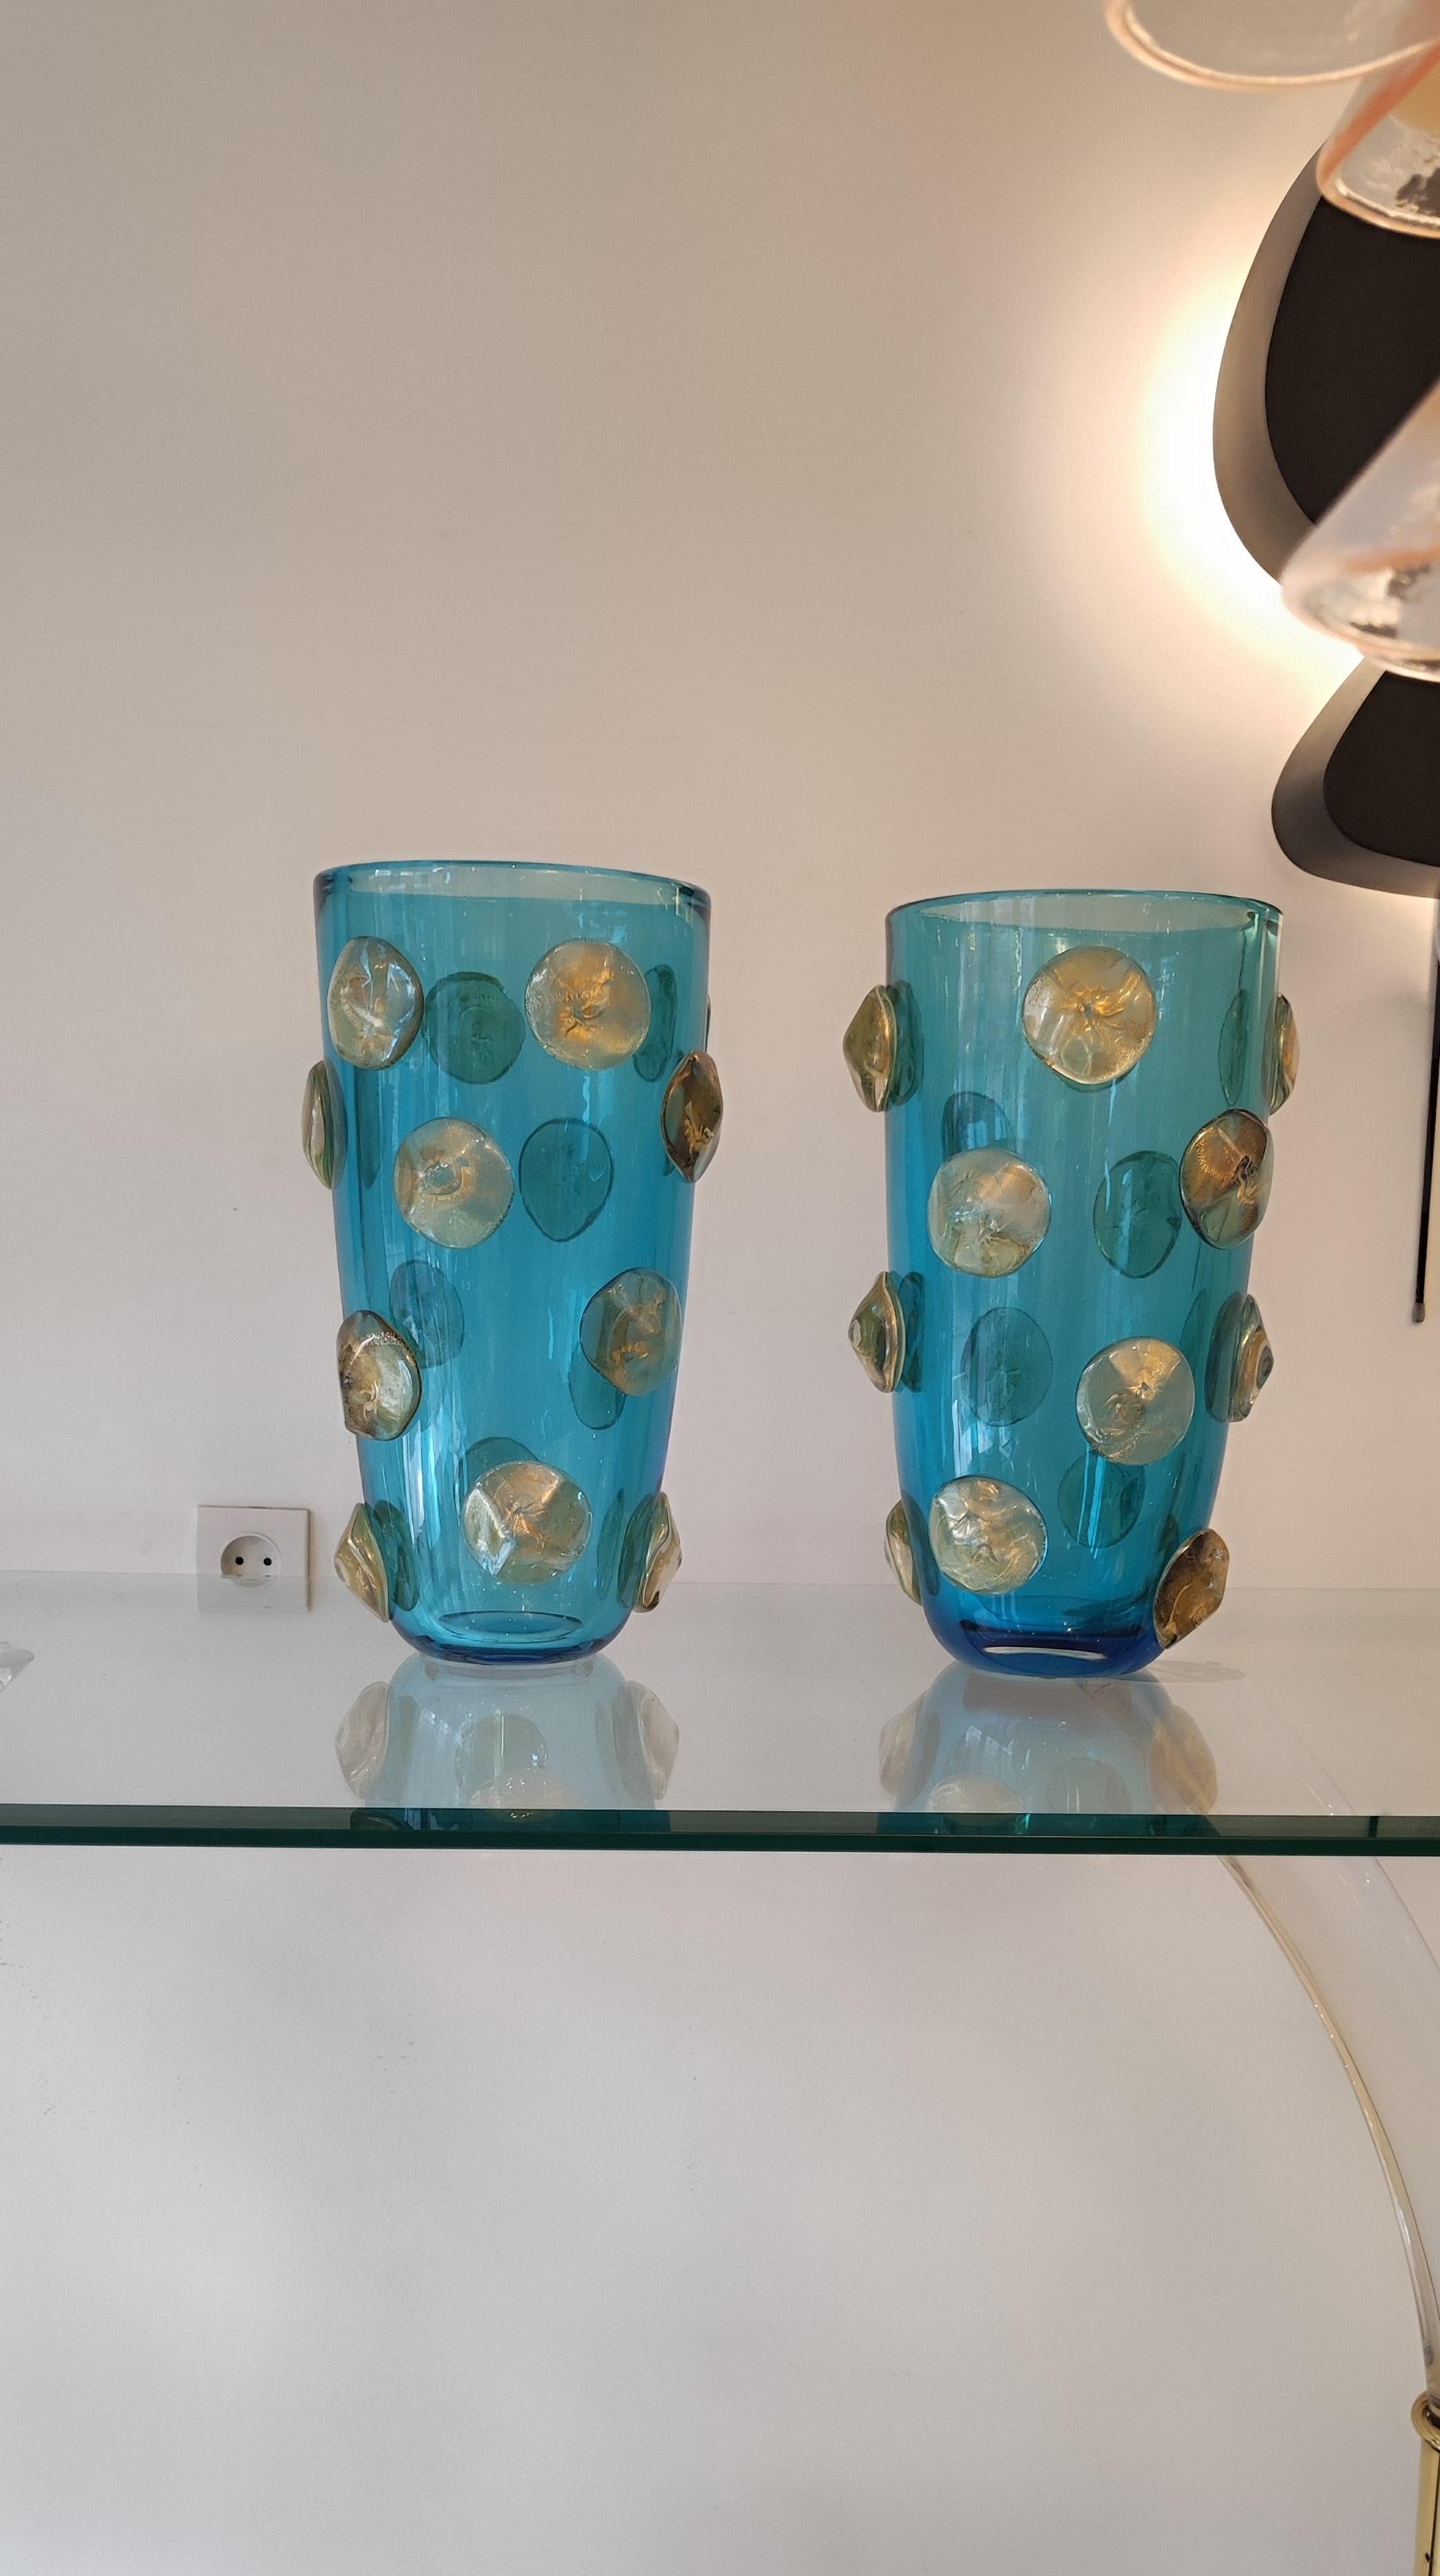 Pair of Blown murano glass vase, blue with golden inserts
Perfect condition. 